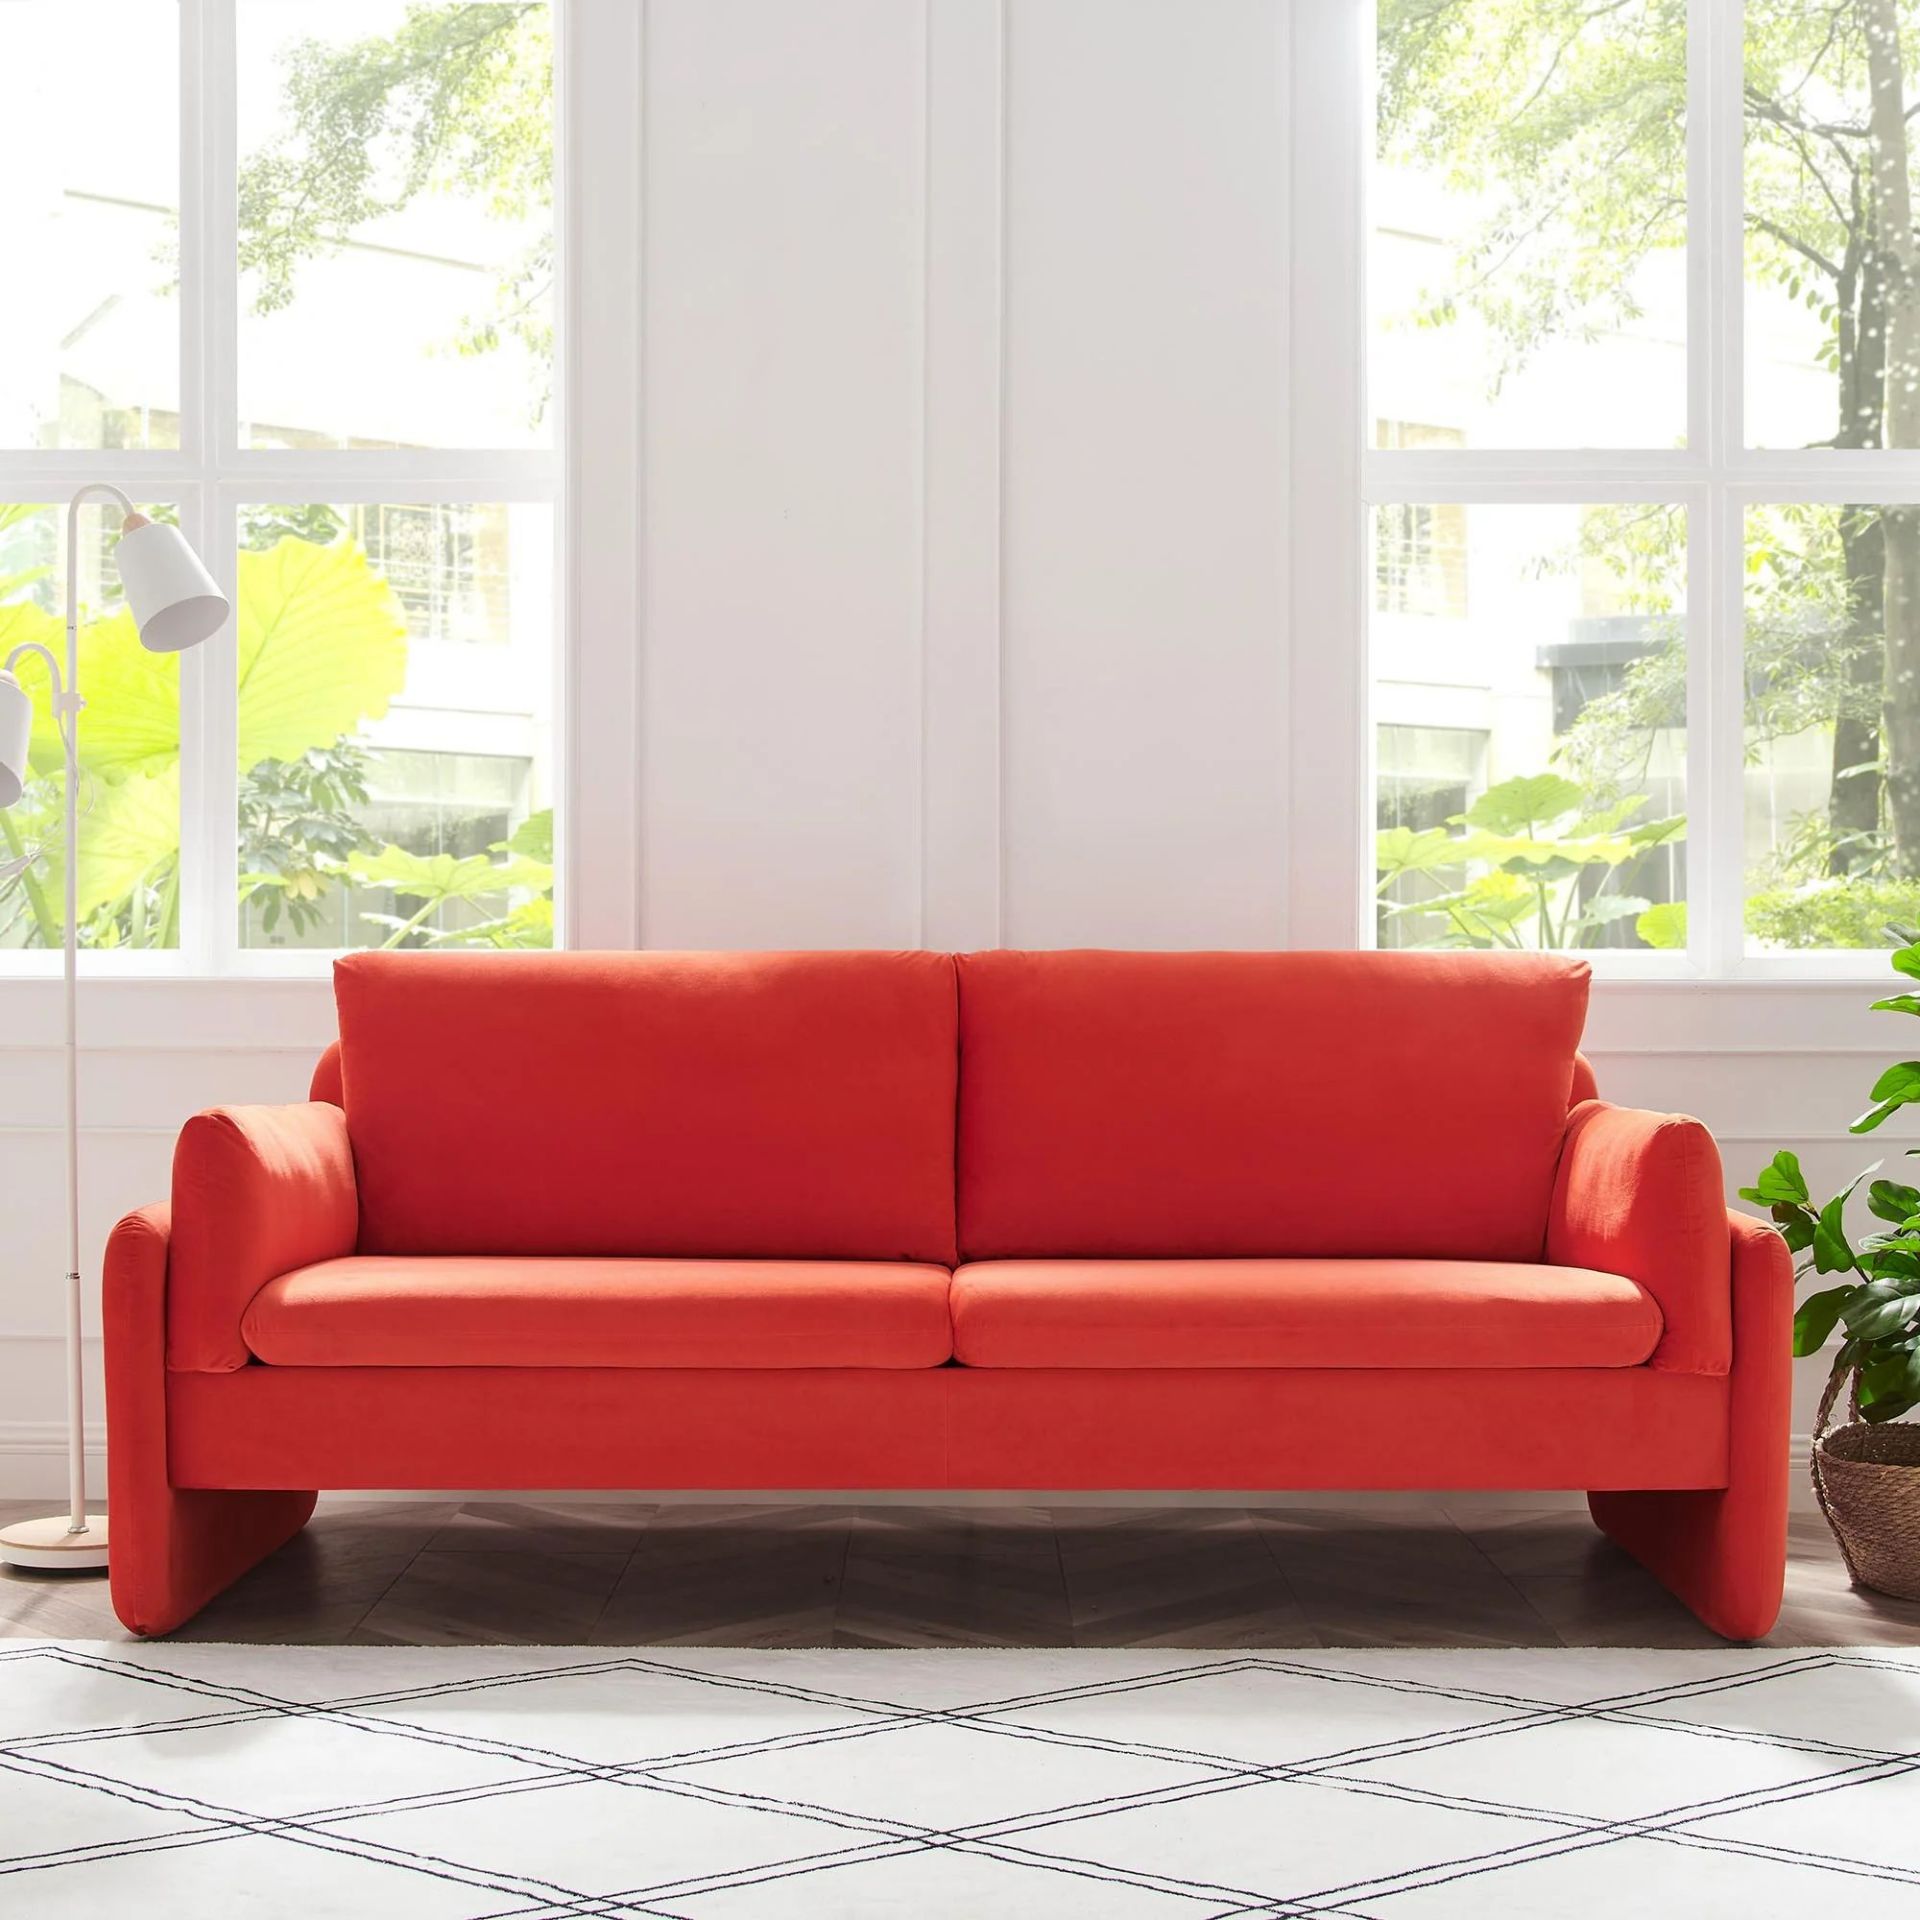 Clapham 3-Seater Flaming Orange Velvet Fabric Sofa. - R14. RRP £659.99. With s-shaped coil wrapped - Image 2 of 2